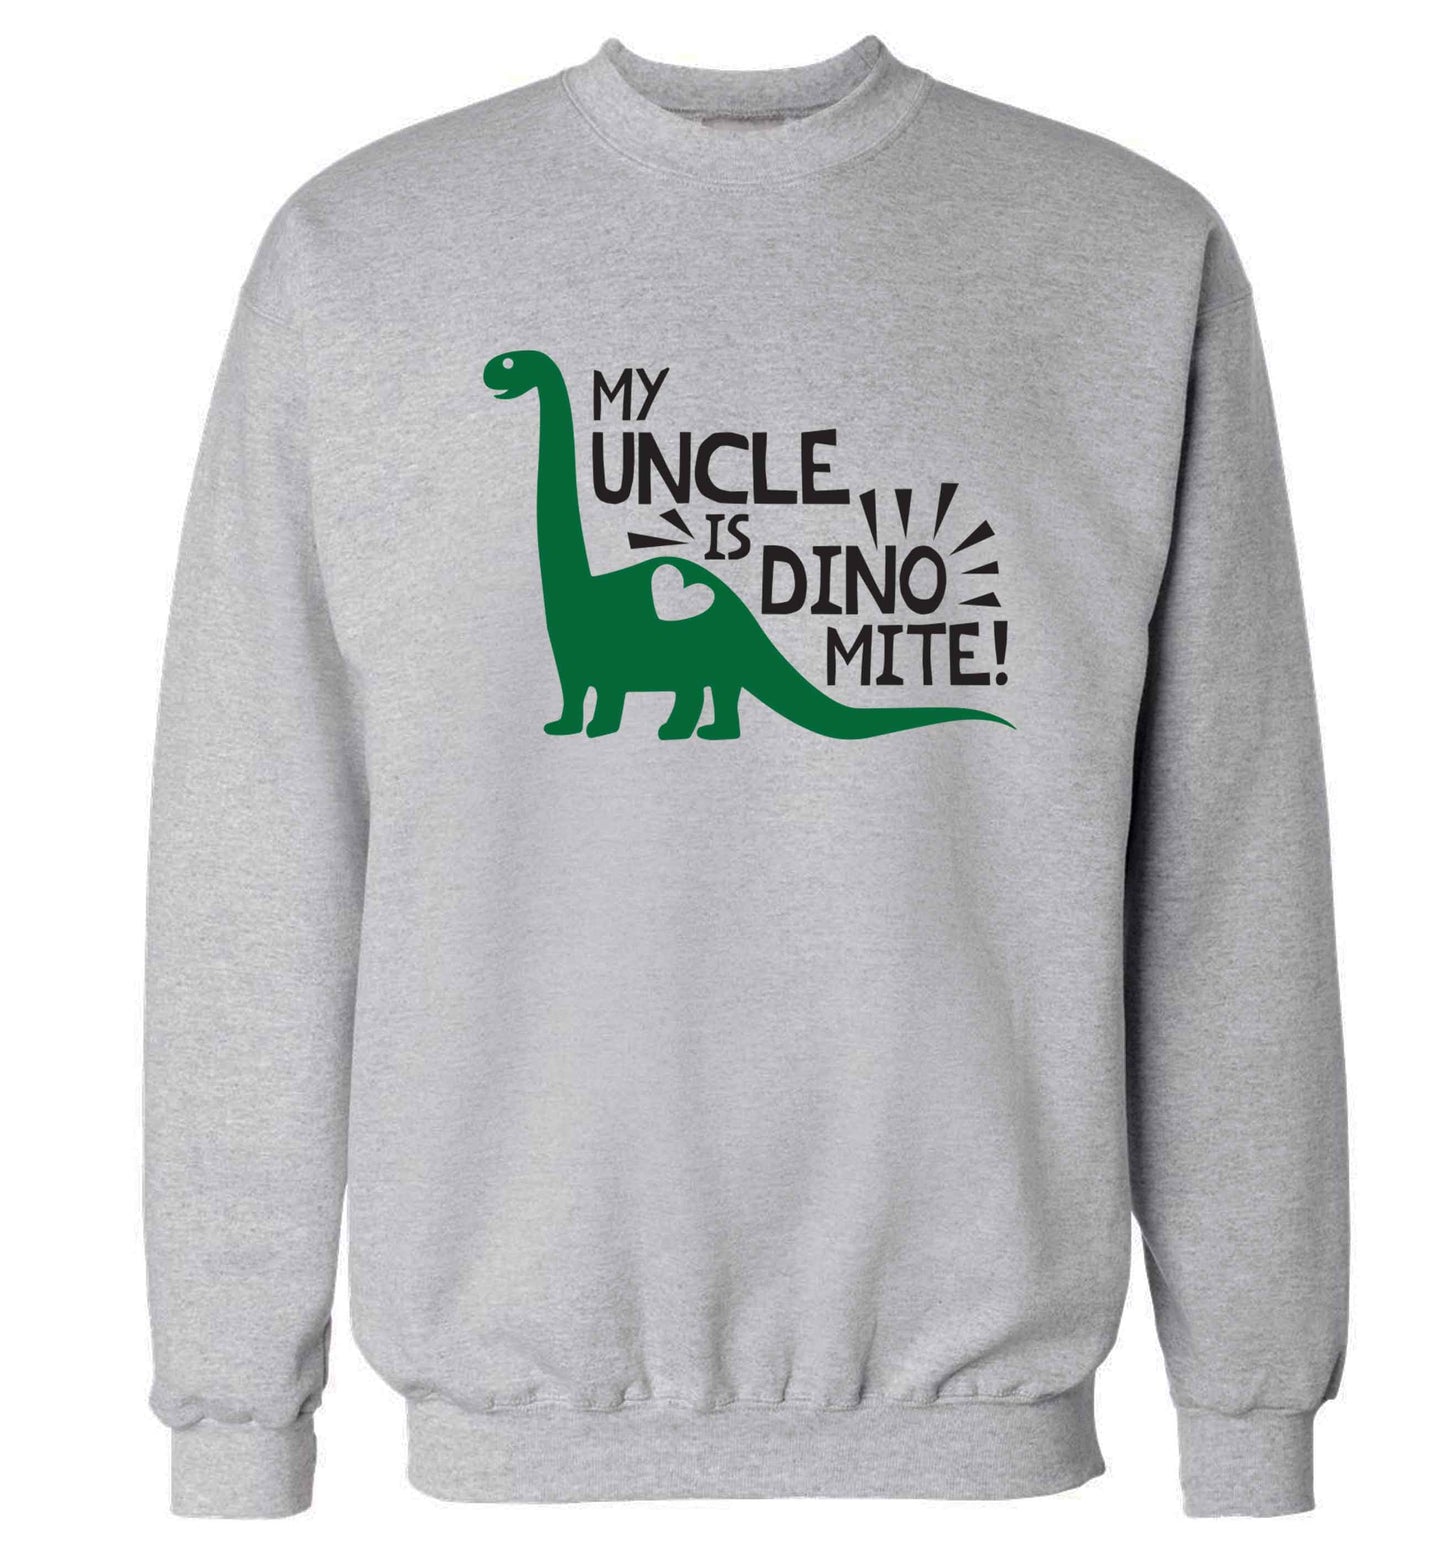 My uncle is dinomite! Adult's unisex grey Sweater 2XL